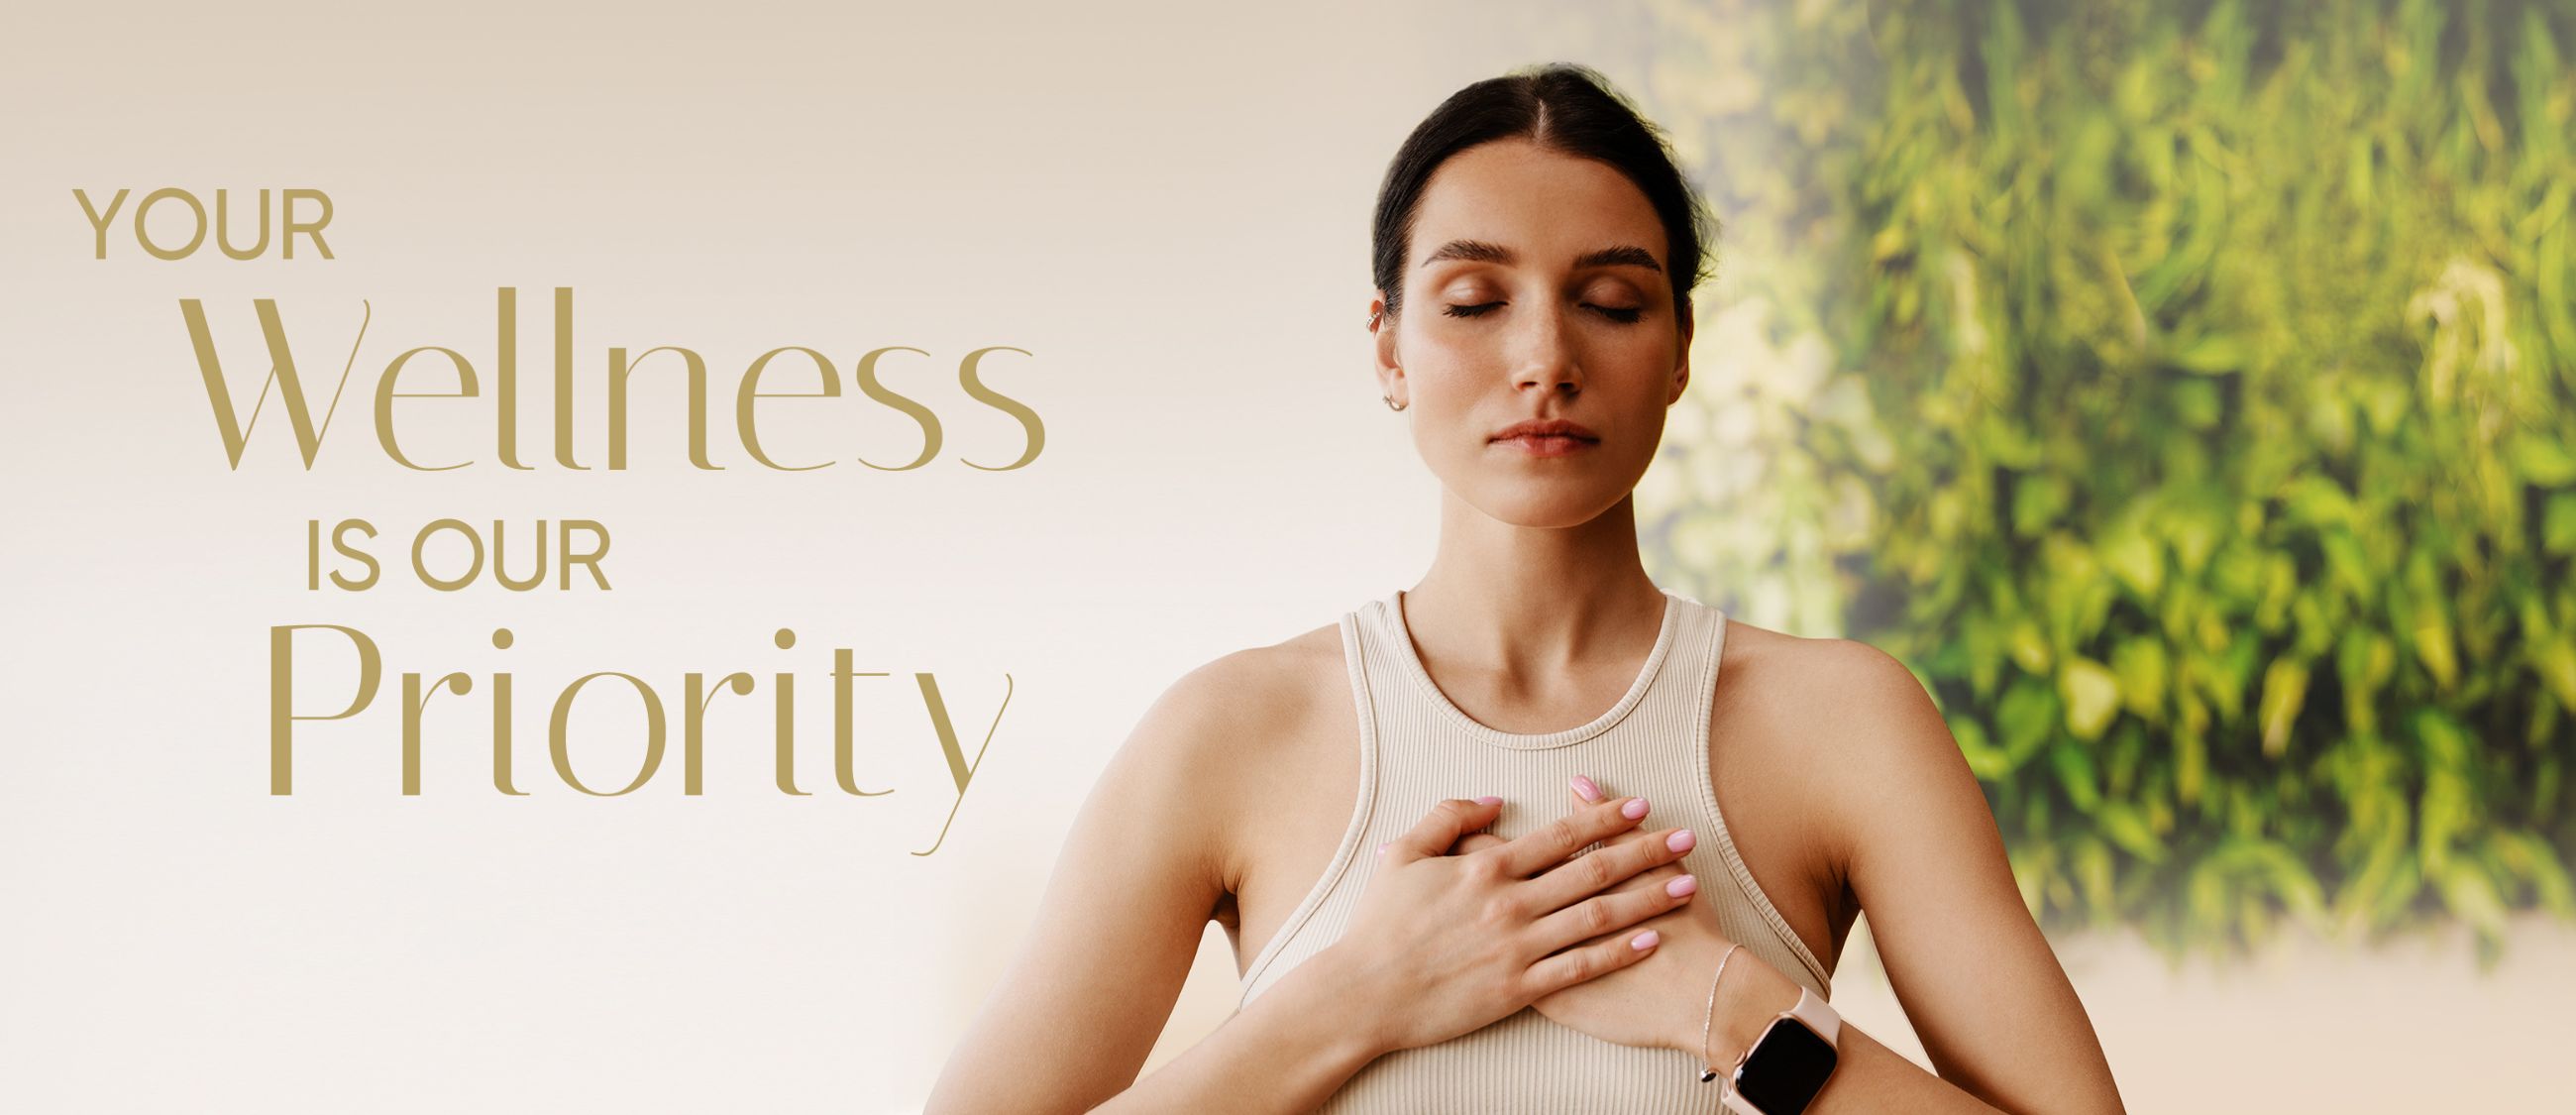 Your Wellness is our Priority